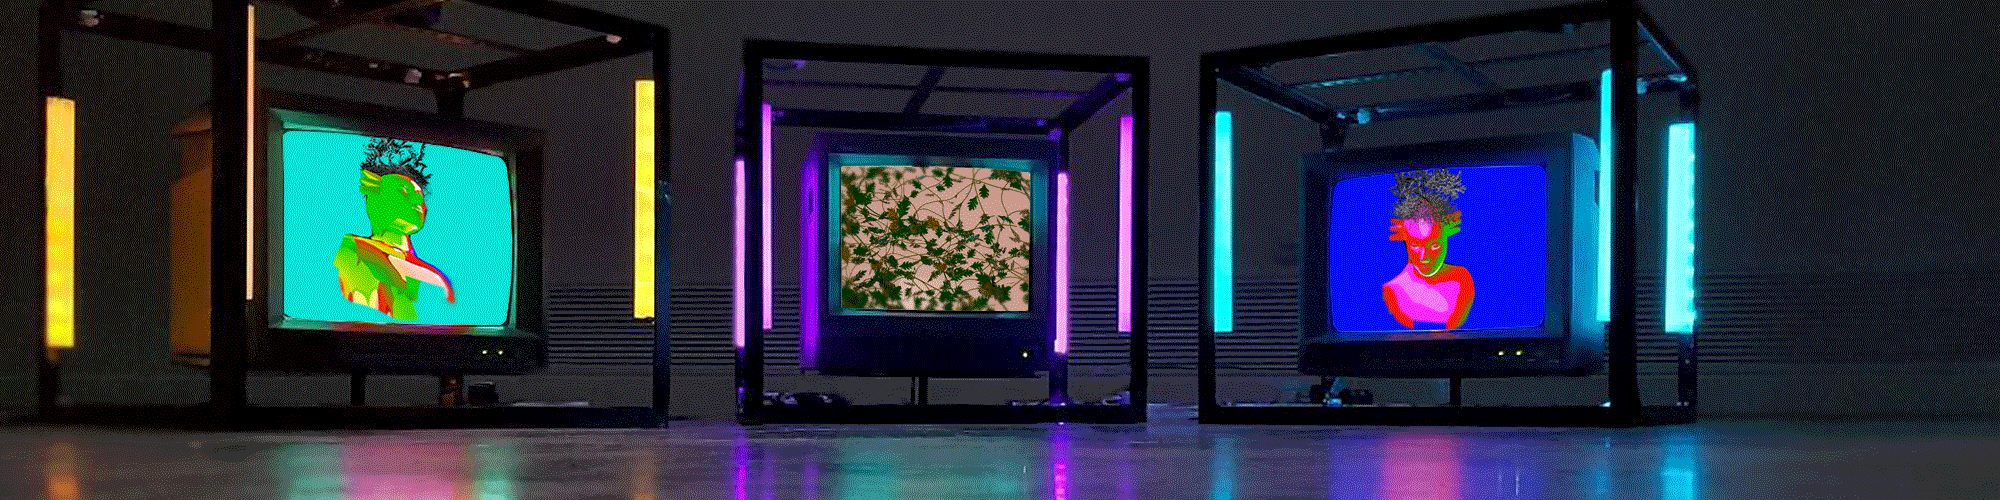 Animated gif image of artworks by artist Milad Forouzandeh. the image shows three cube tvs each displaying a still image from the video work. From left to right the images on the screens are of a human head on a baby blue background, a map territory with natural elements and trees, and a pink human bust on a deep blue background.